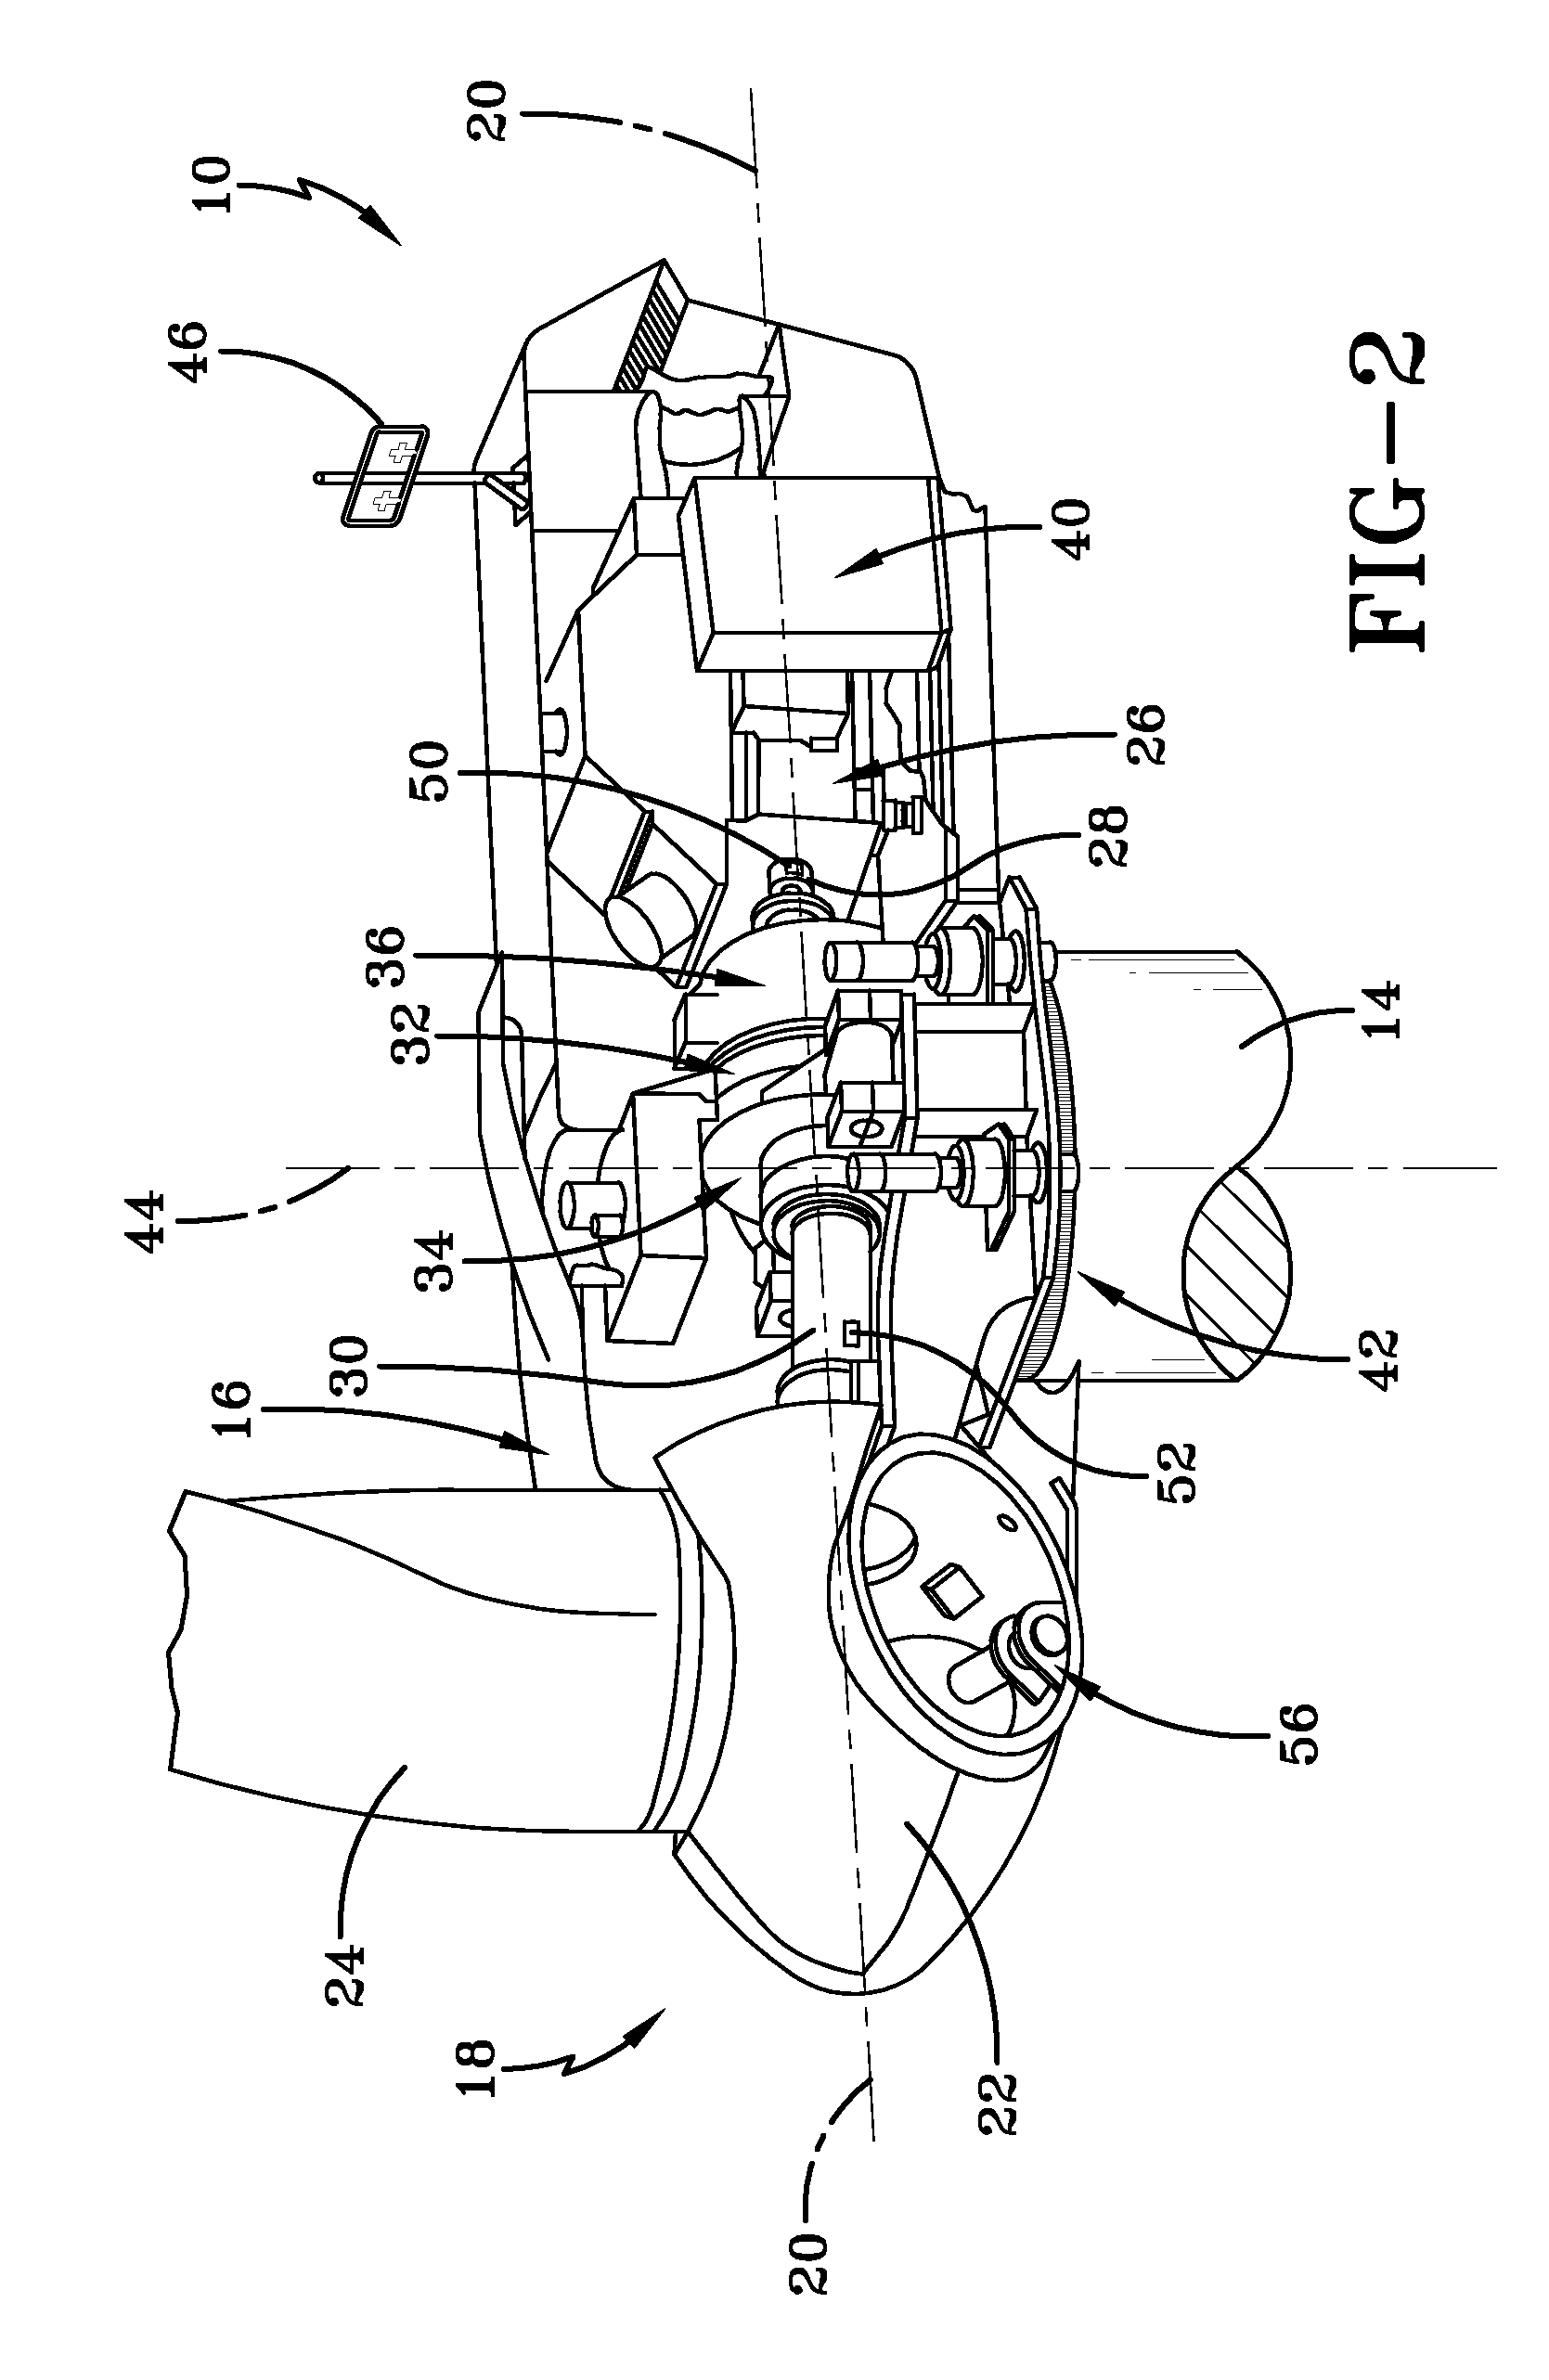 Method and apparatus for controlling the tip speed of a blade of a wind turbine